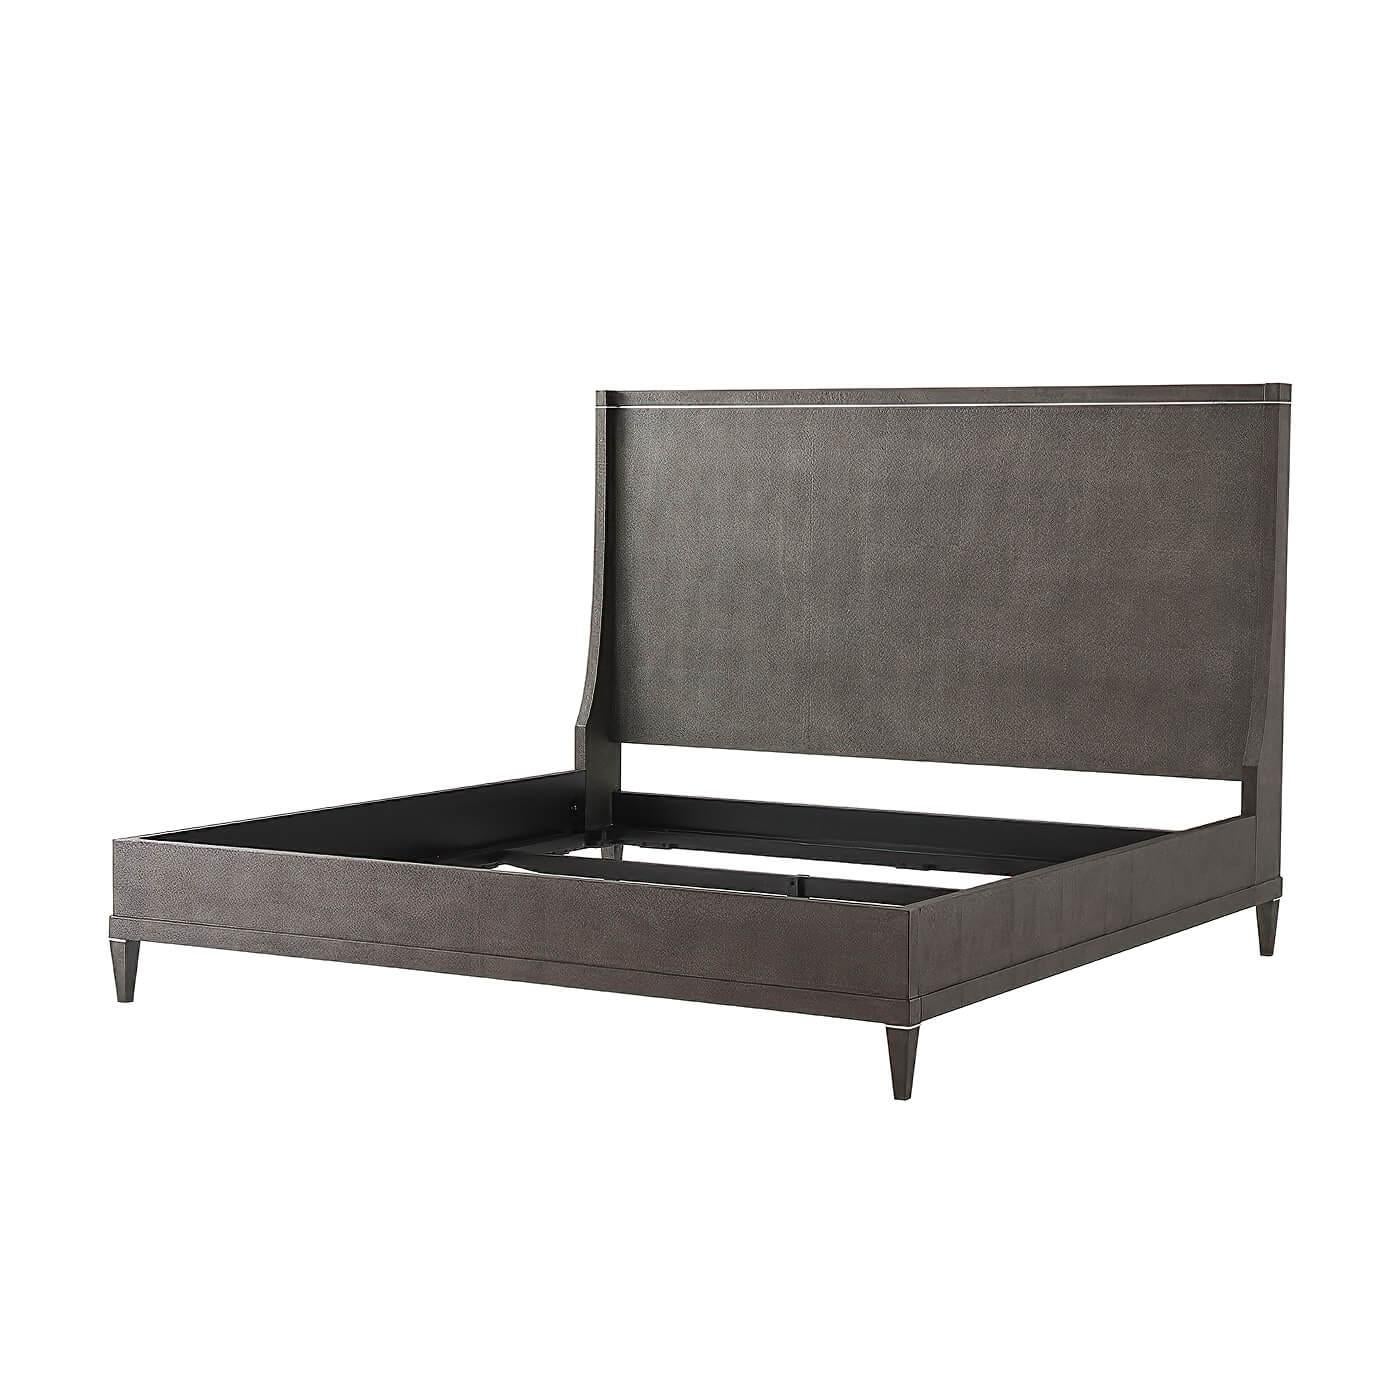 A classic modern Tempest Finish shagreen embossed leather-wrapped queen size bed. The headboard with down swept wings, with polished nickel molding details, a stepped rail frame on square tapered legs. 

Dimensions: 65.5